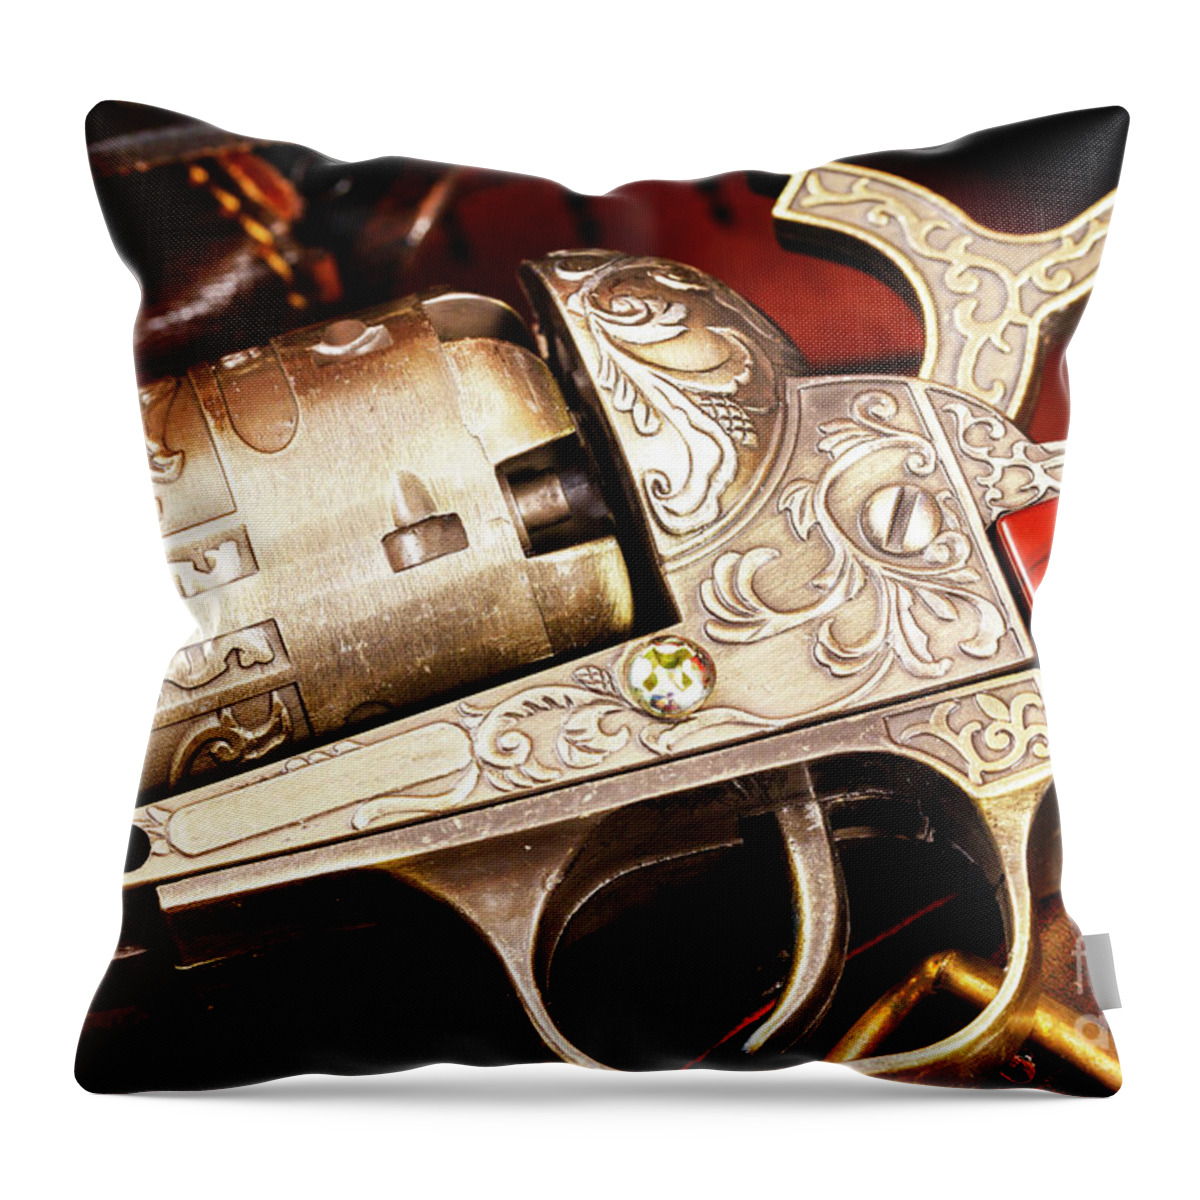 Hammer Cocked Throw Pillow featuring the photograph Hammer Cocked by John Rizzuto